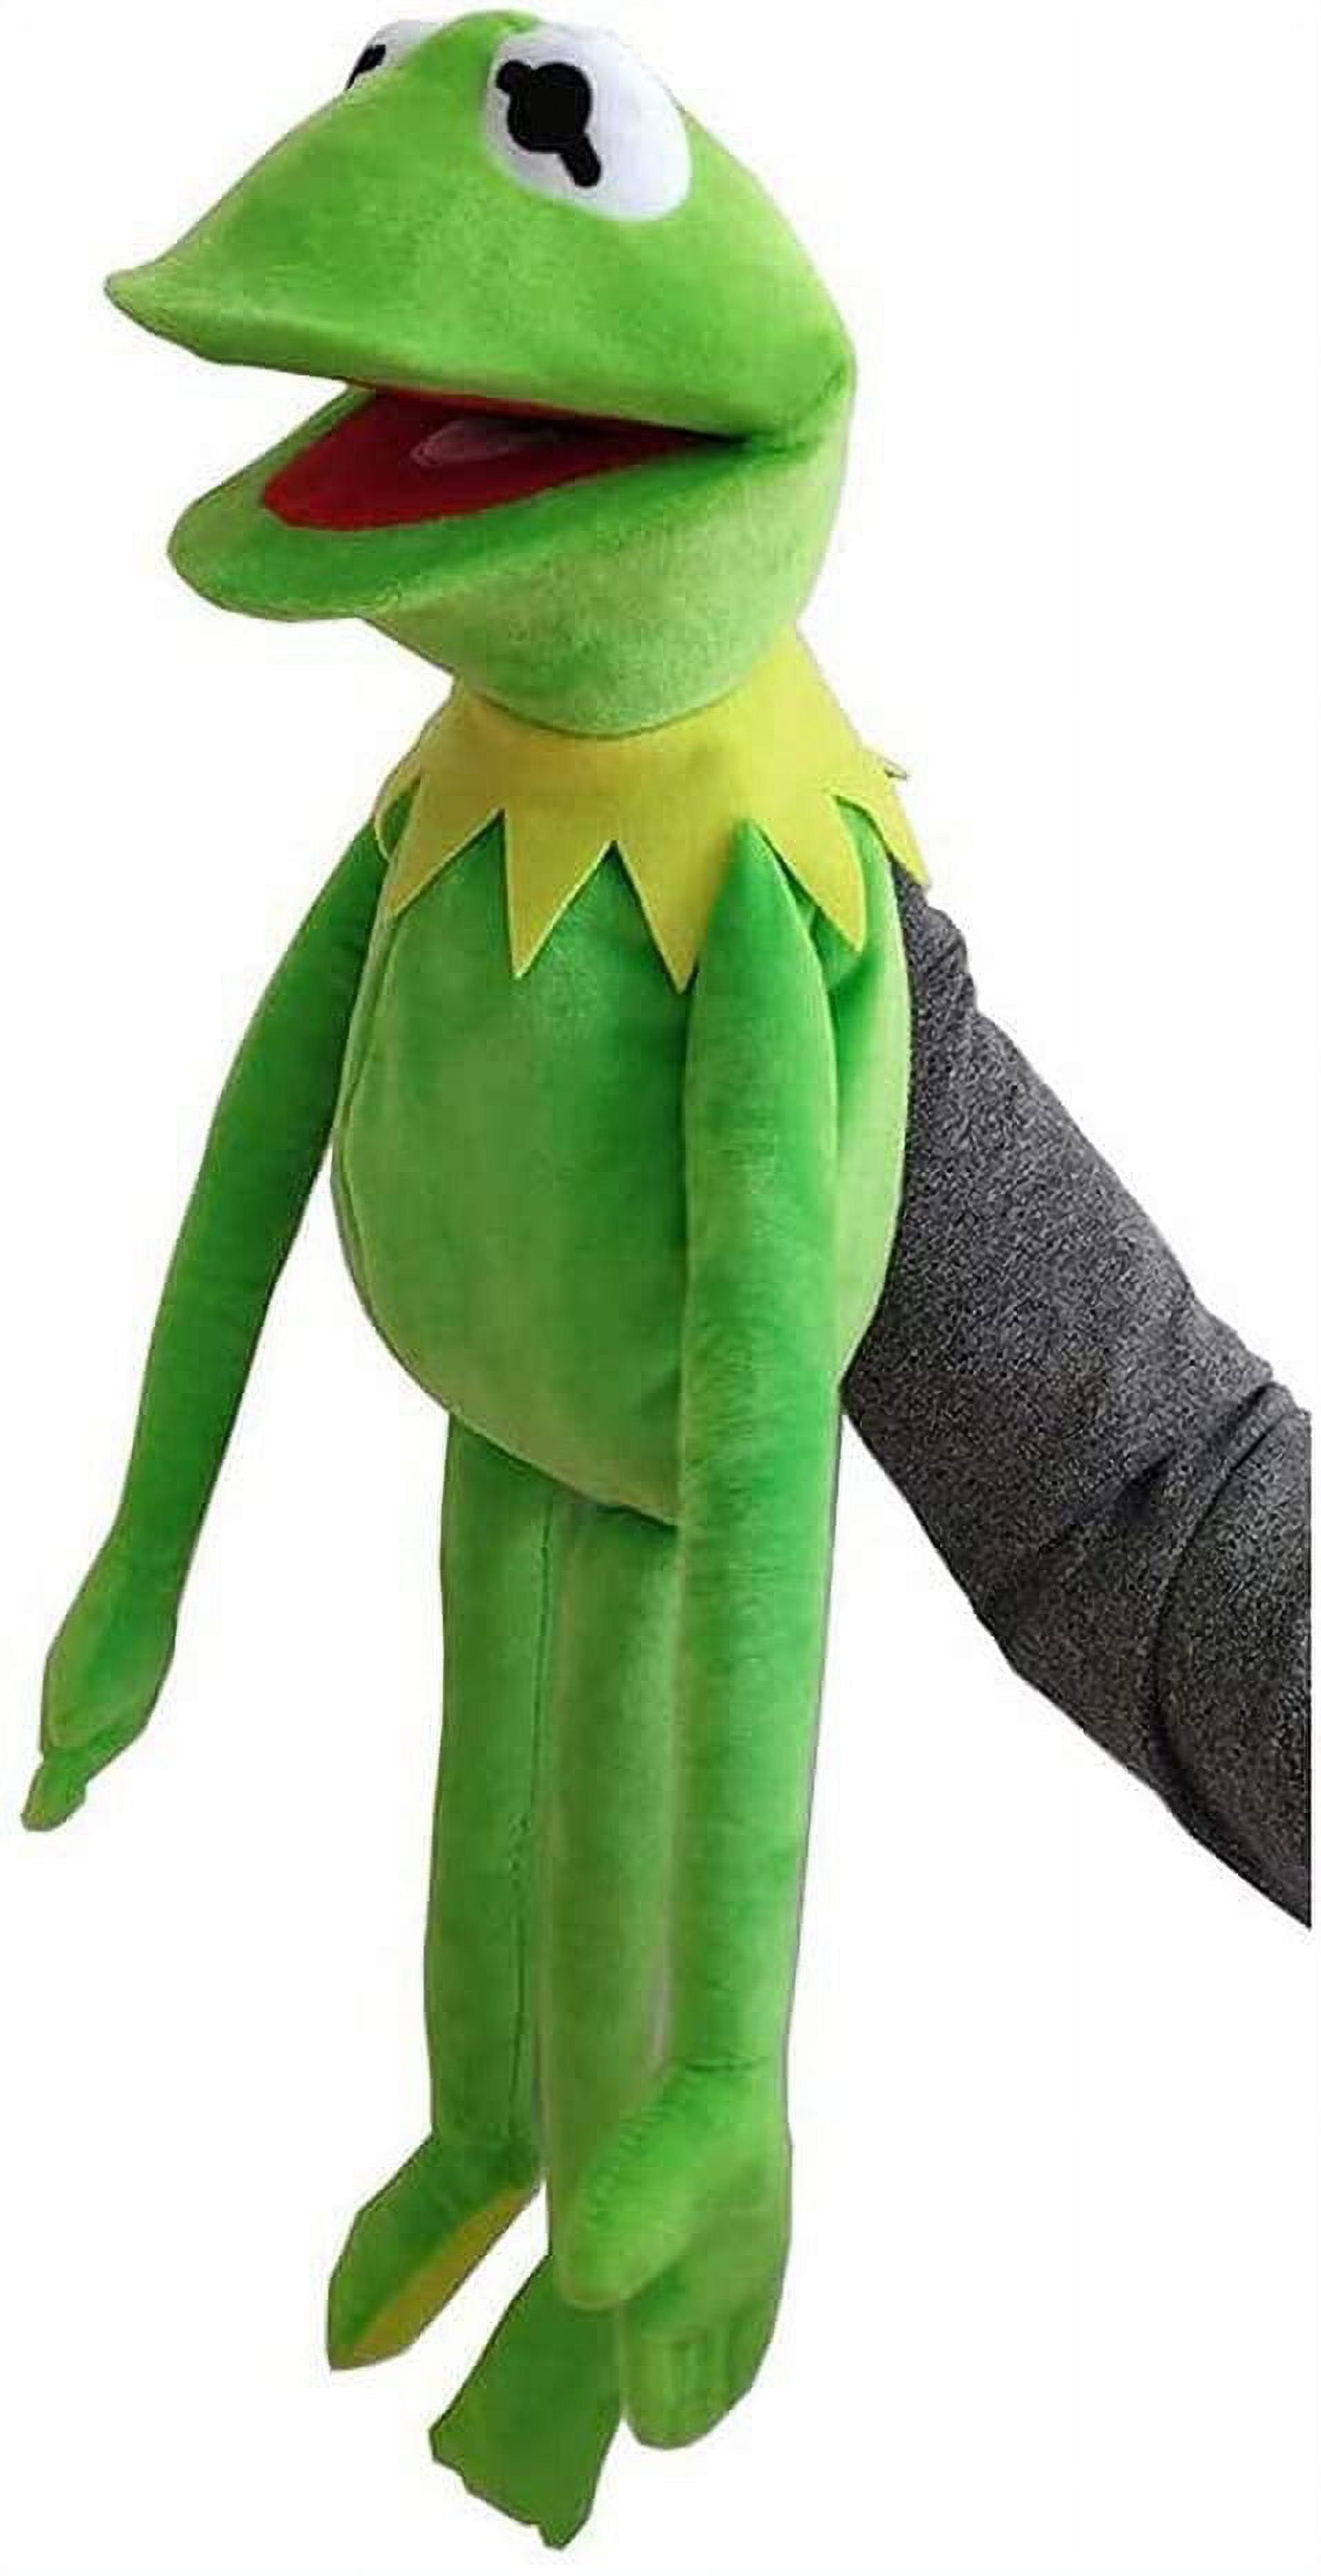 Funny Hand Puppet,Kermit Frog Puppet PlushnThe Muppet Show Large Kermit  Frog Puppets Toy Doll Stuffed,Soft Frog Puppets Kids Toy